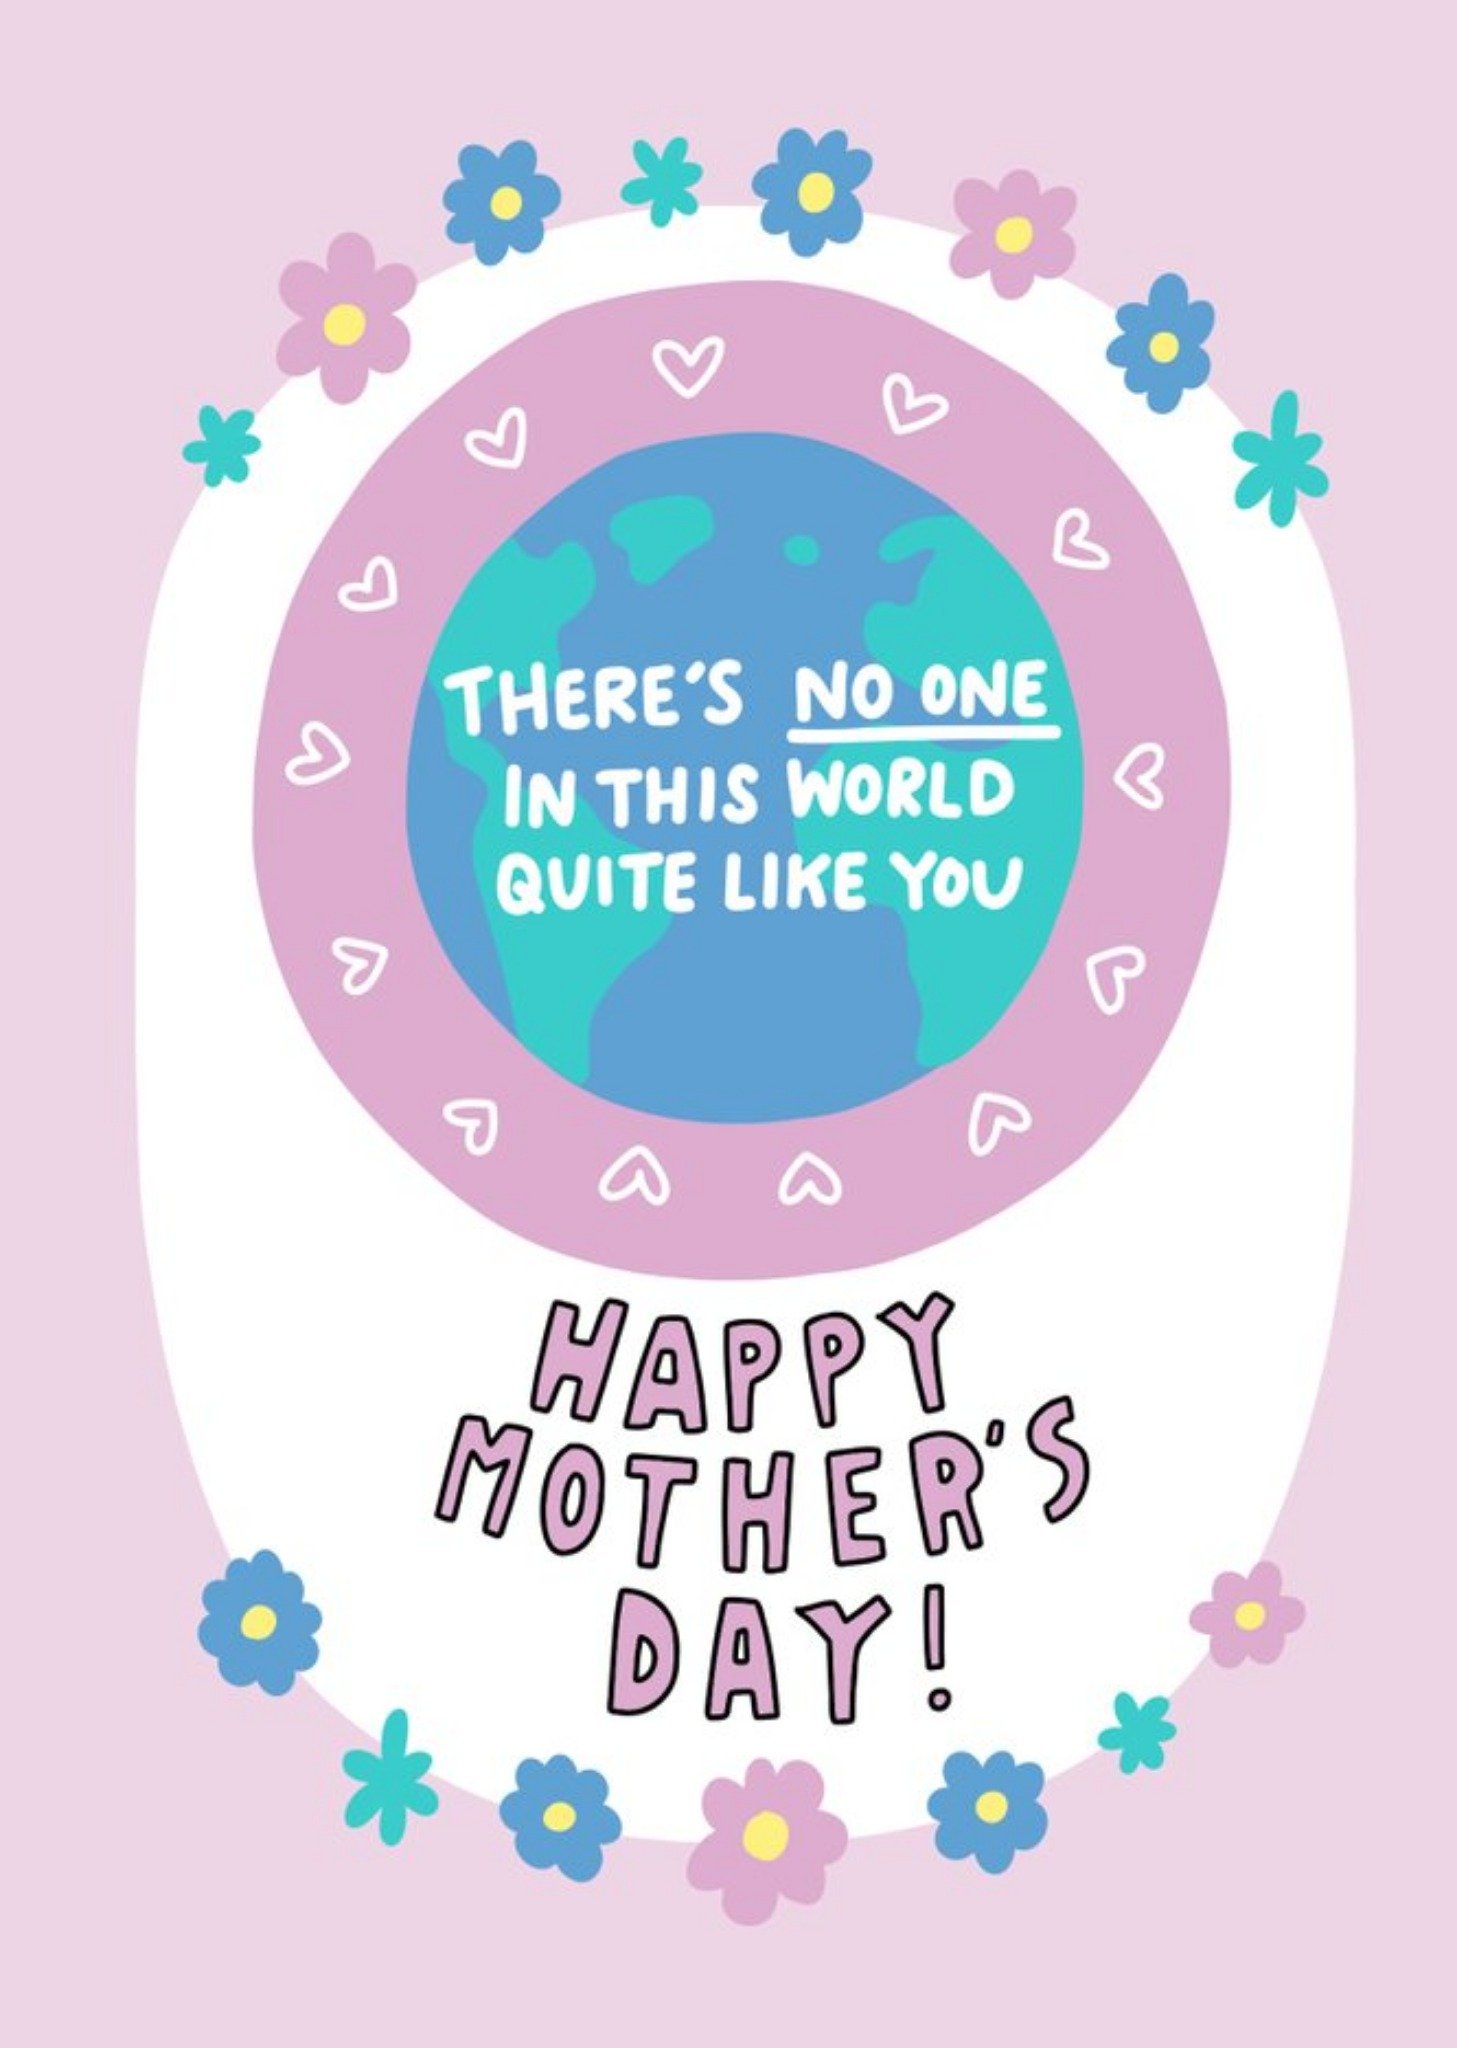 Moonpig Angela Chick No One In This World Quite Like You Mother's Day Card Ecard